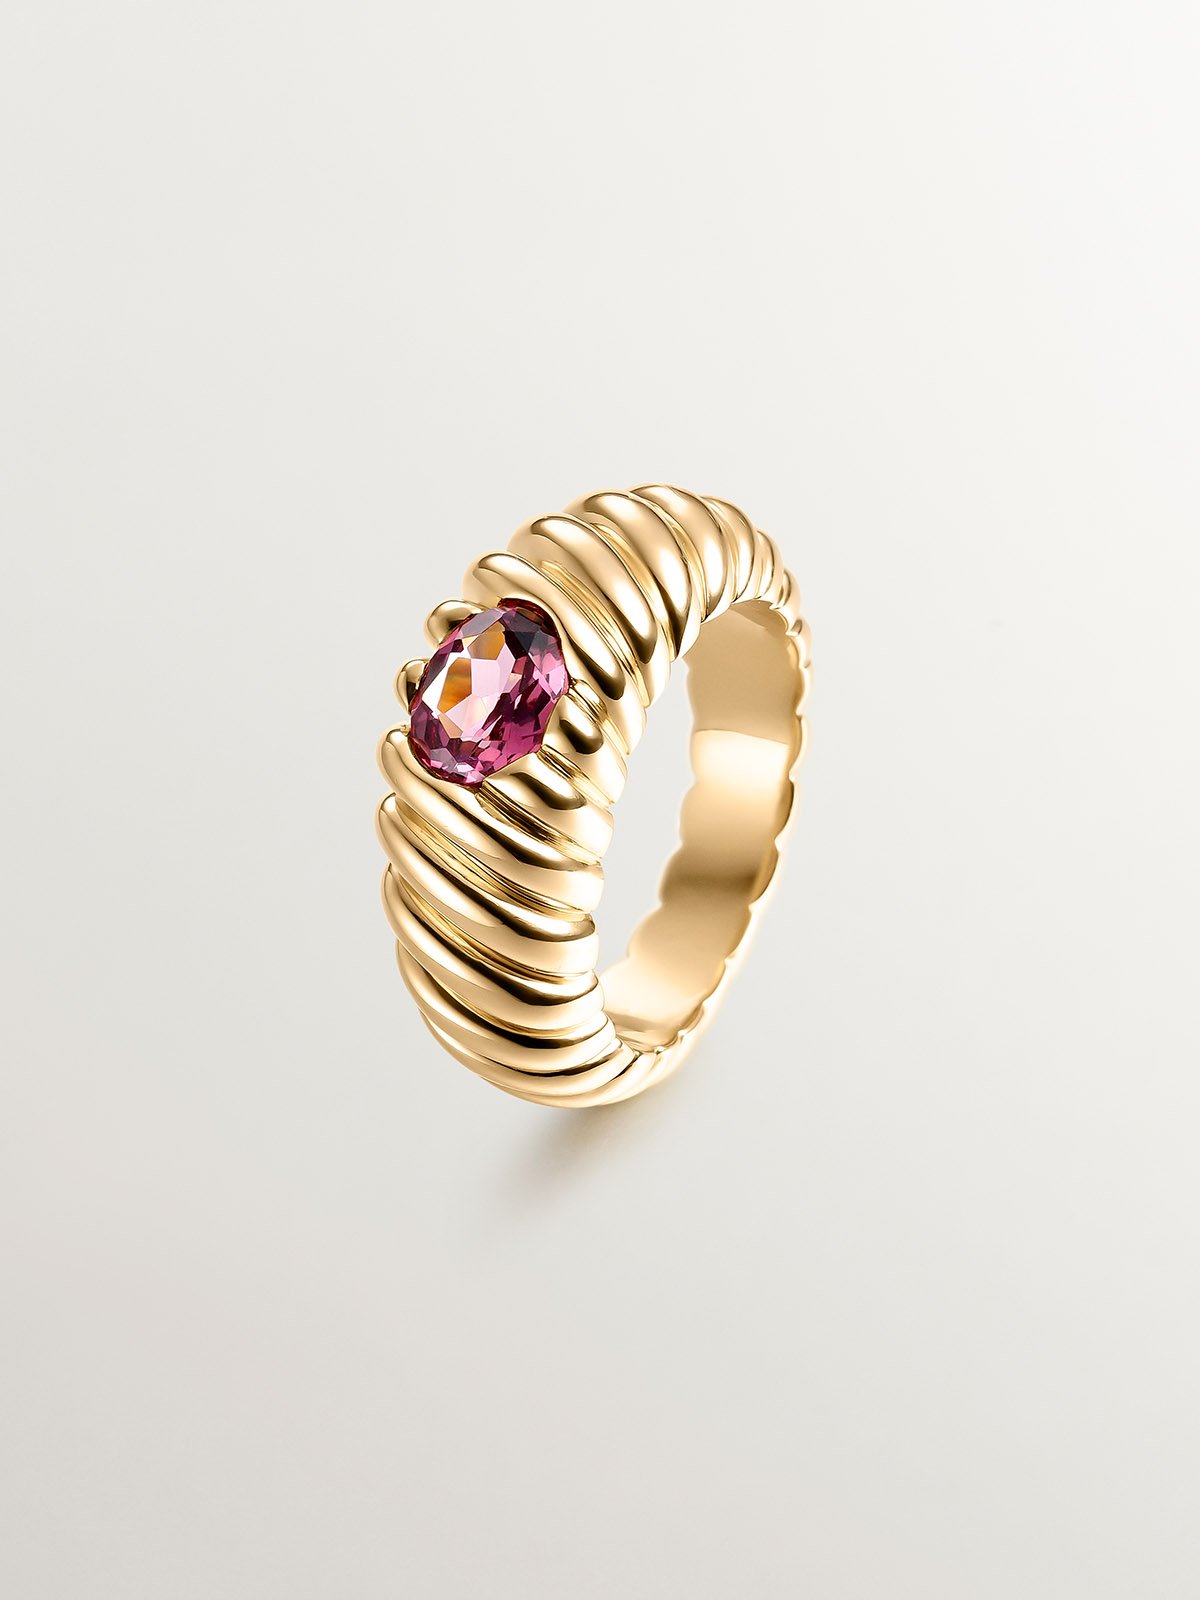 Gallon ring in 925 silver plated in 18K yellow gold with pink rhodolite